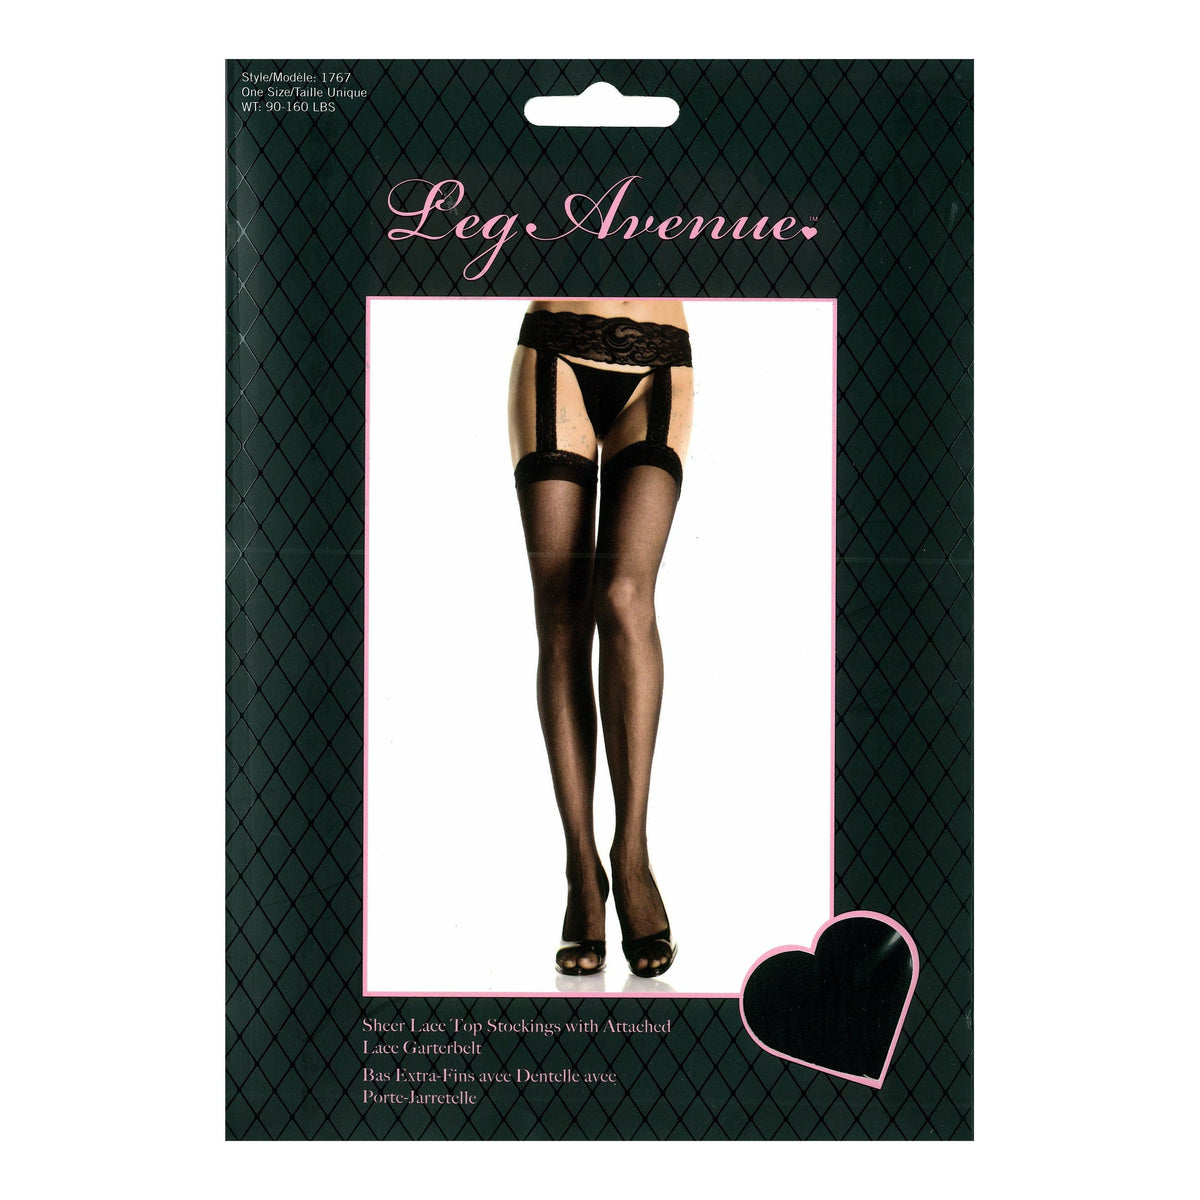 Leg Avenue Sheer Lace Top Stockings with Attached Lace Garterbelt - Black - One Size